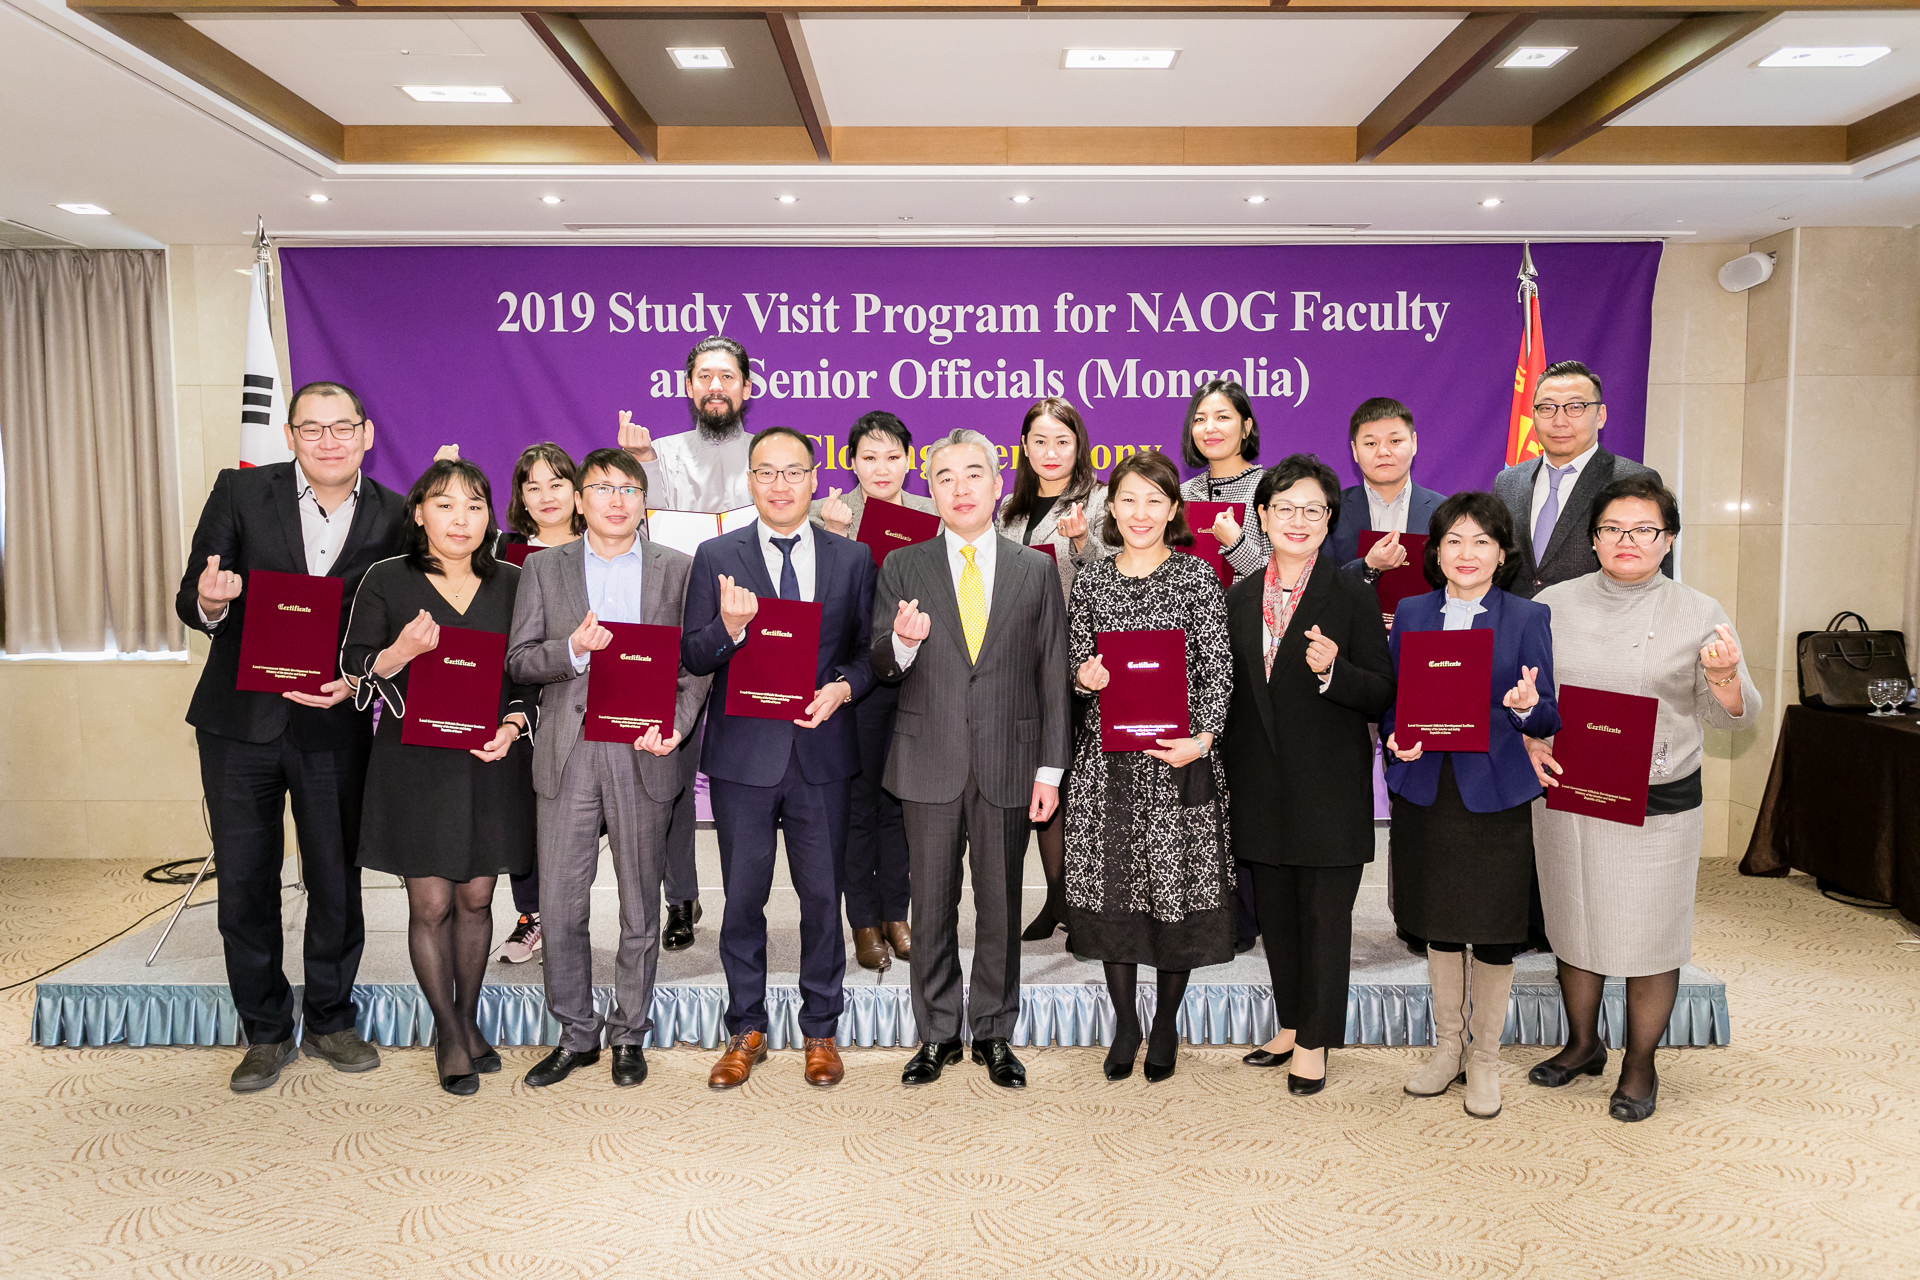 NAOG faculty and senior officials from Mongolia completes the customized program.